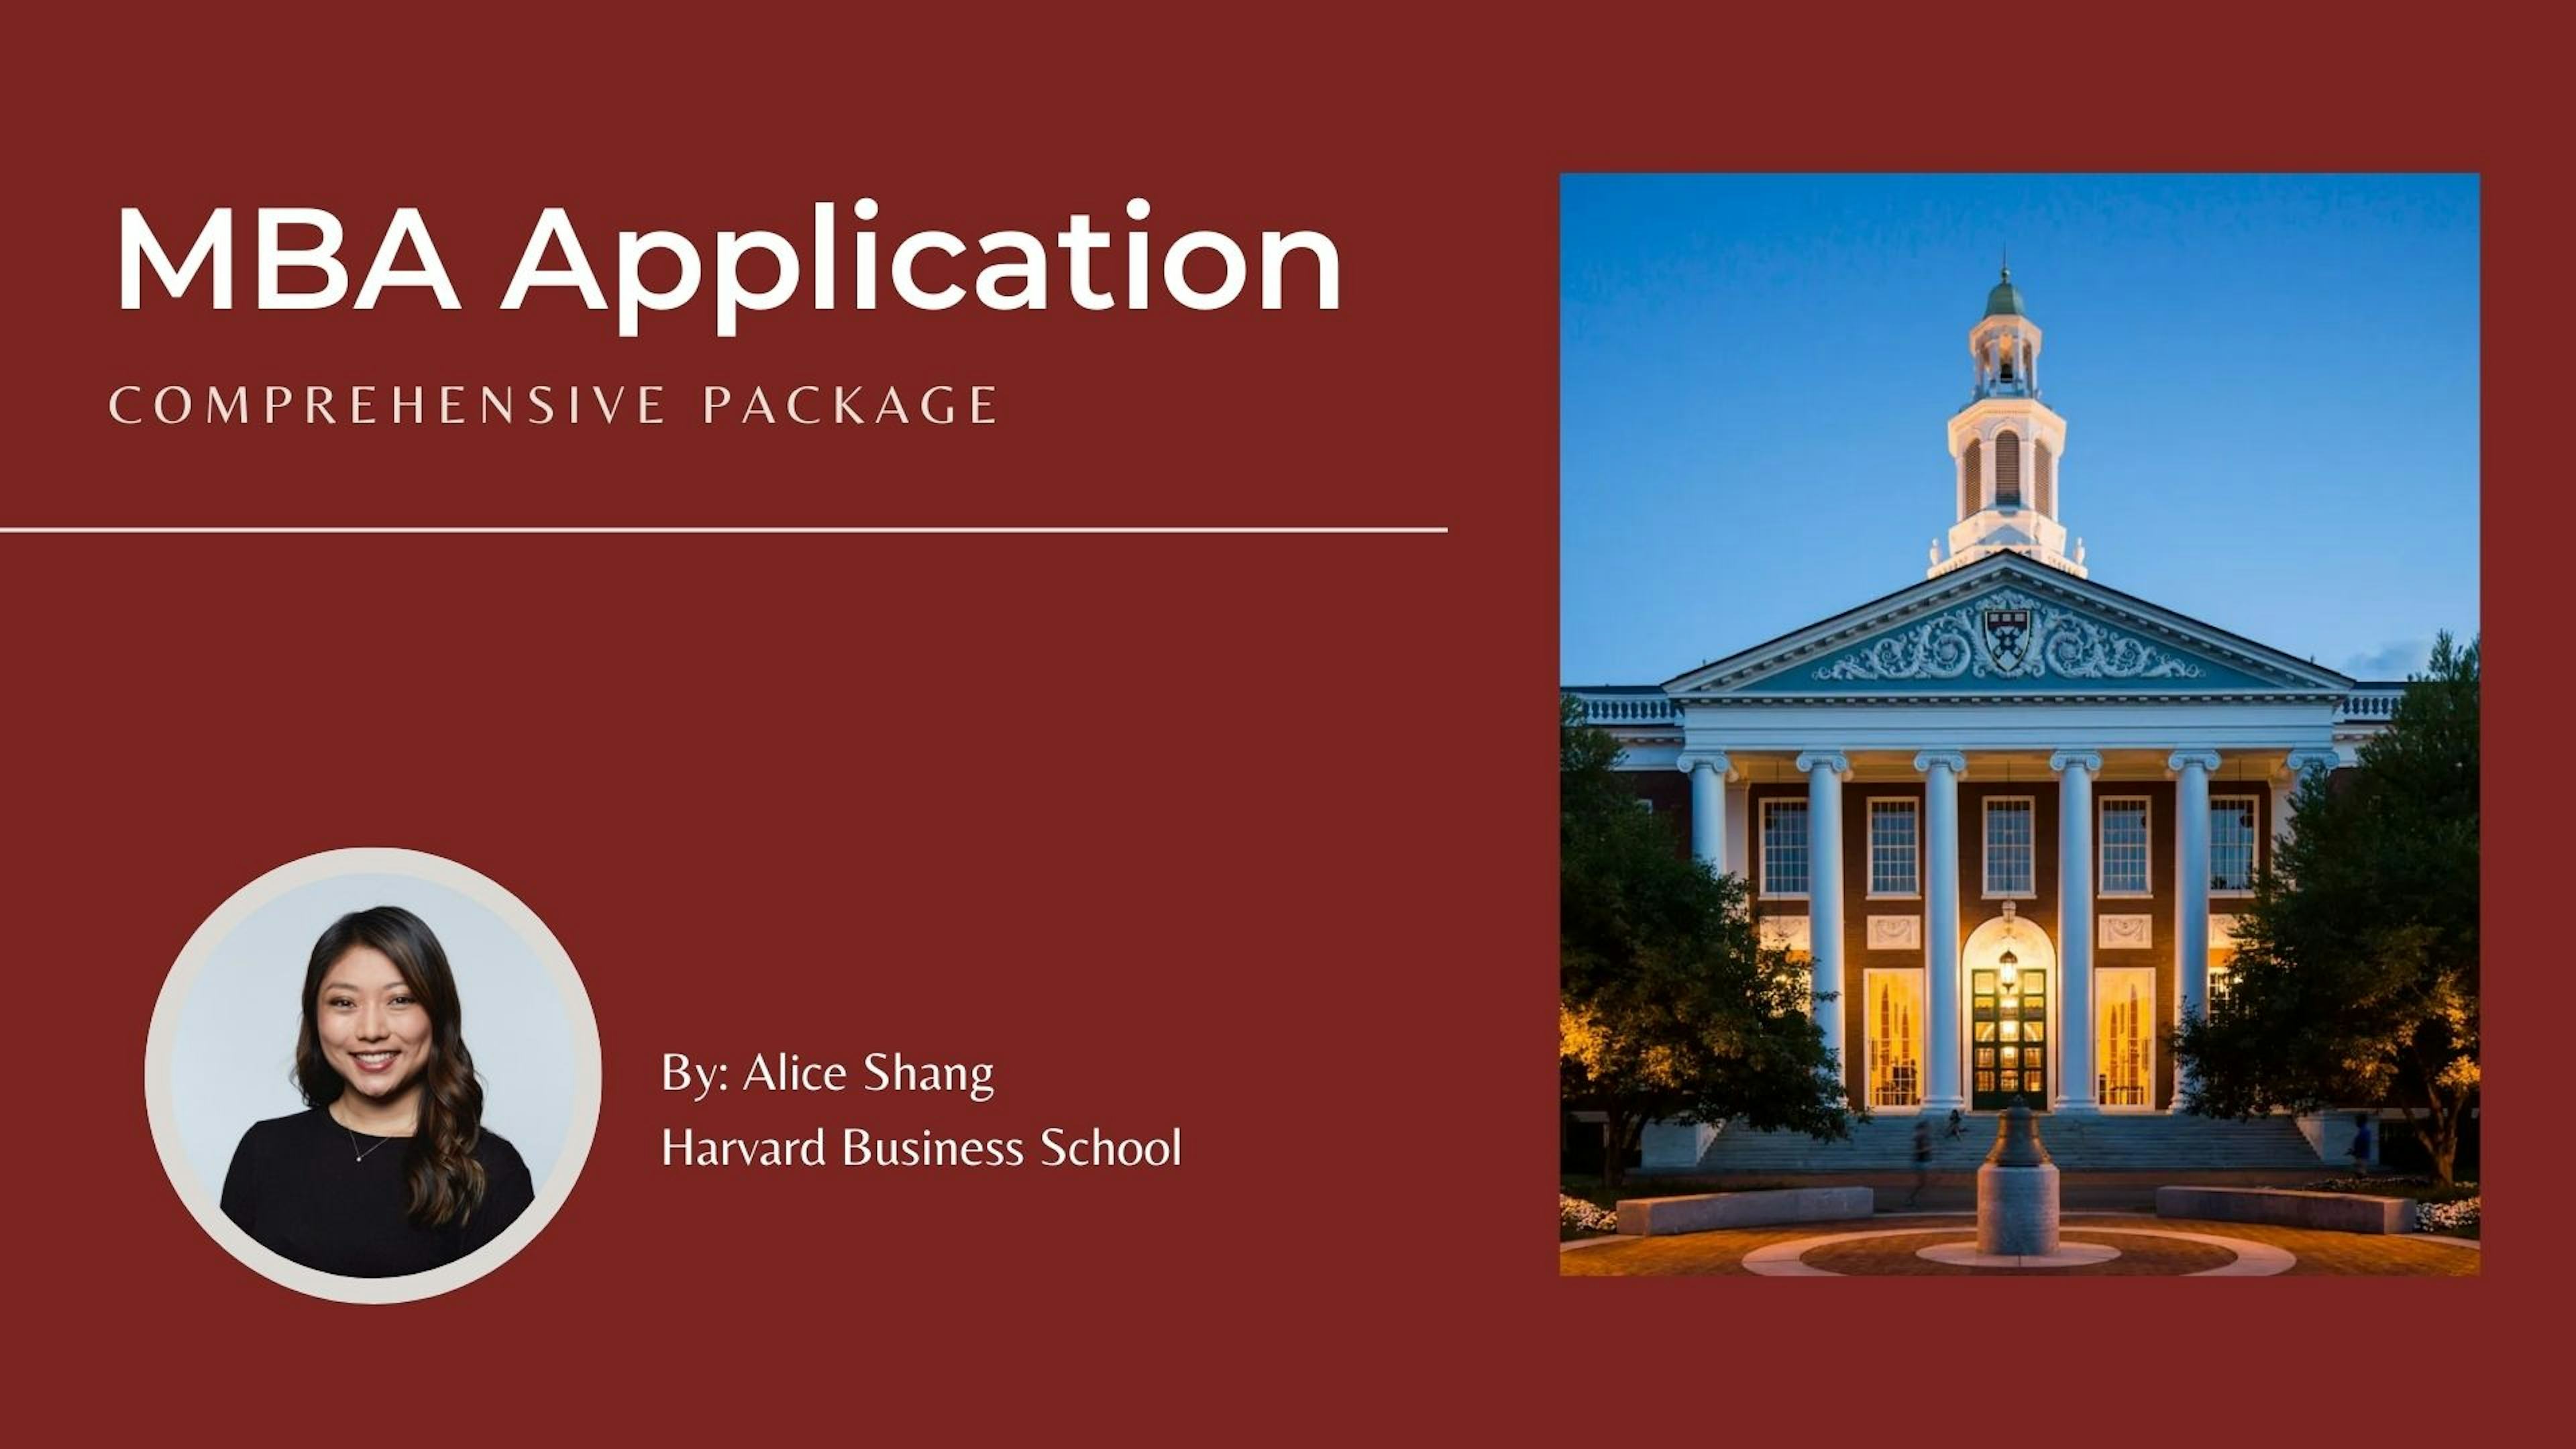 MBA Application Packages